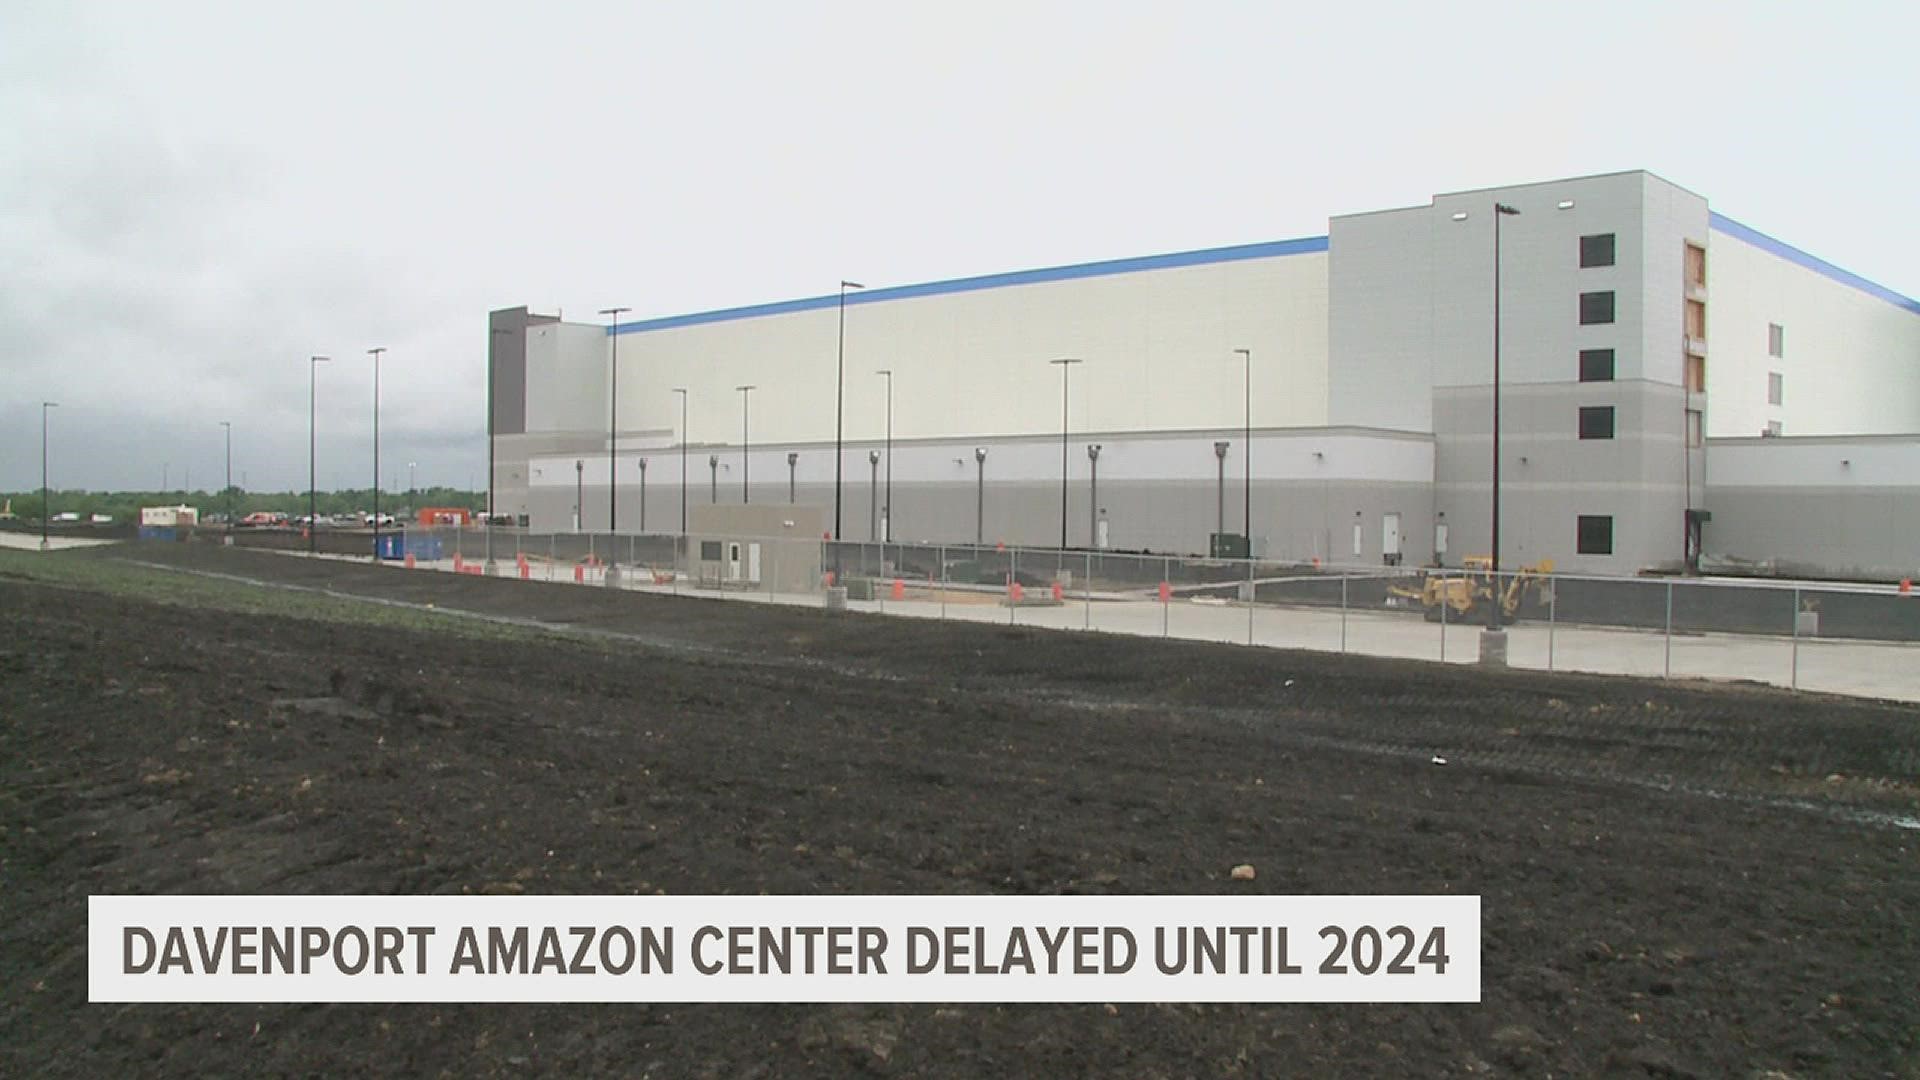 The highly-anticipated facility originally set to open in September has been delayed until 2024, according to an Amazon spokesperson.